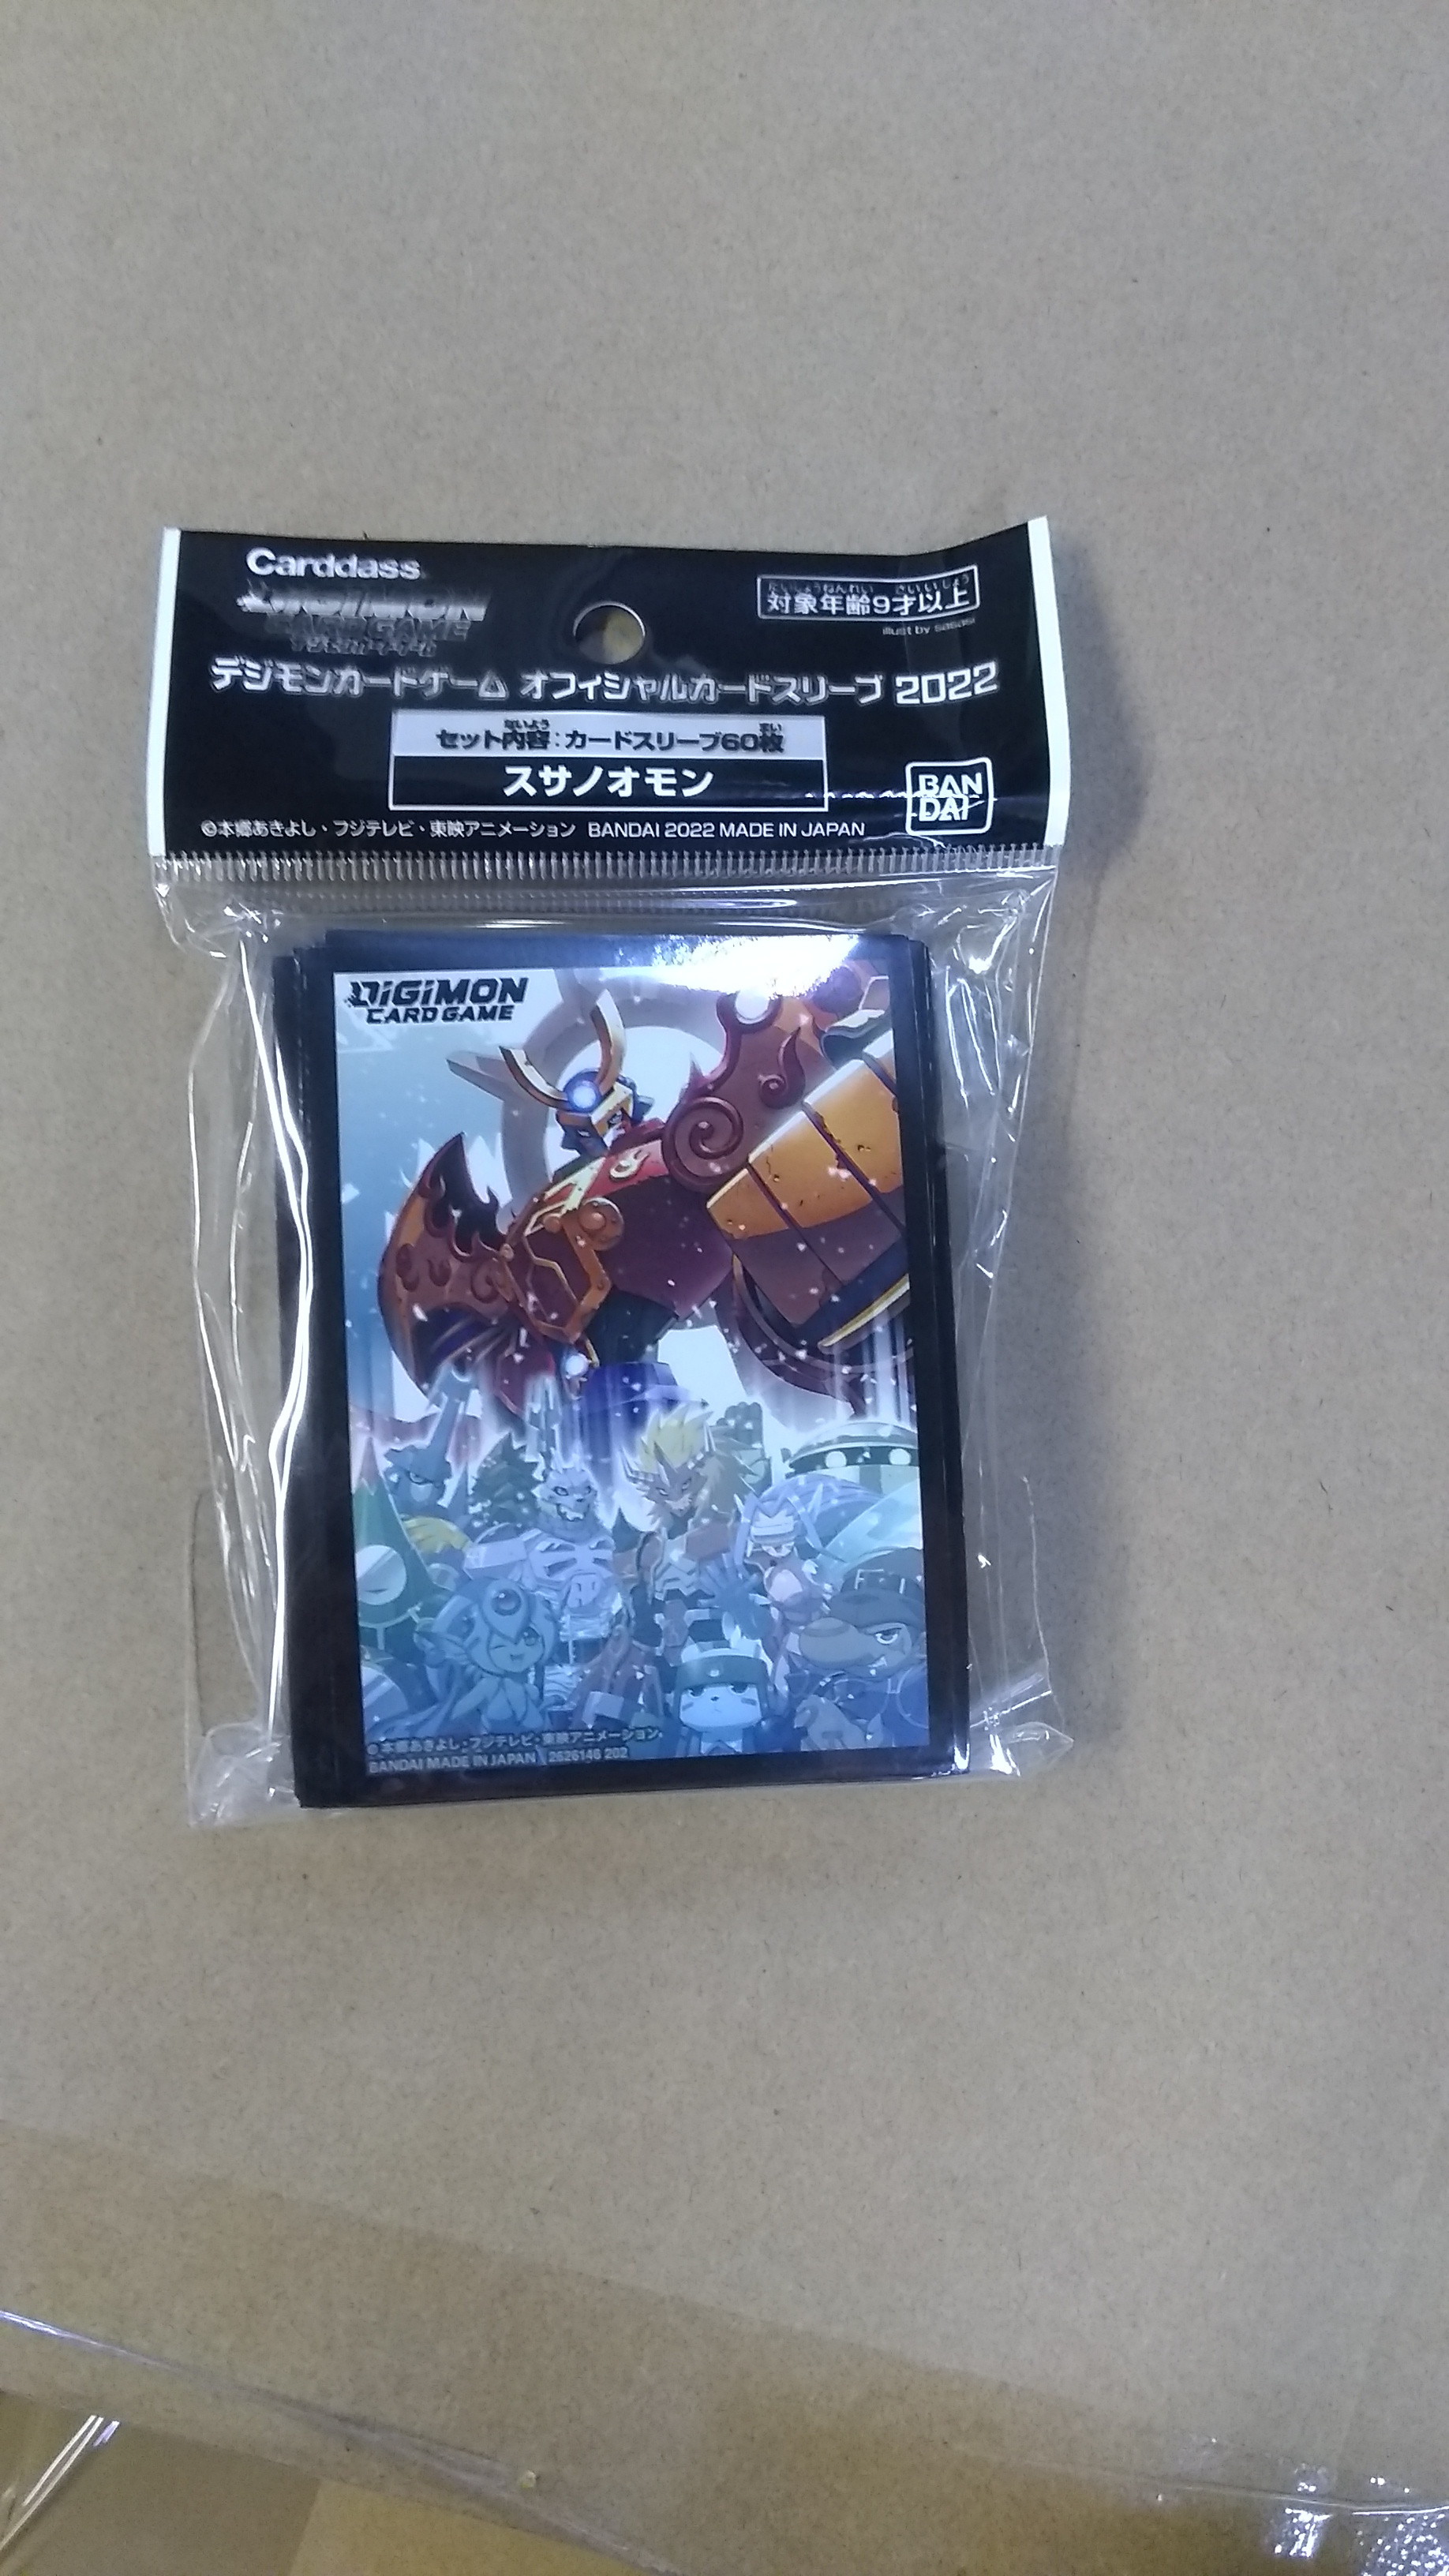 Digimon: Card Sleeves 2022 - Style C 